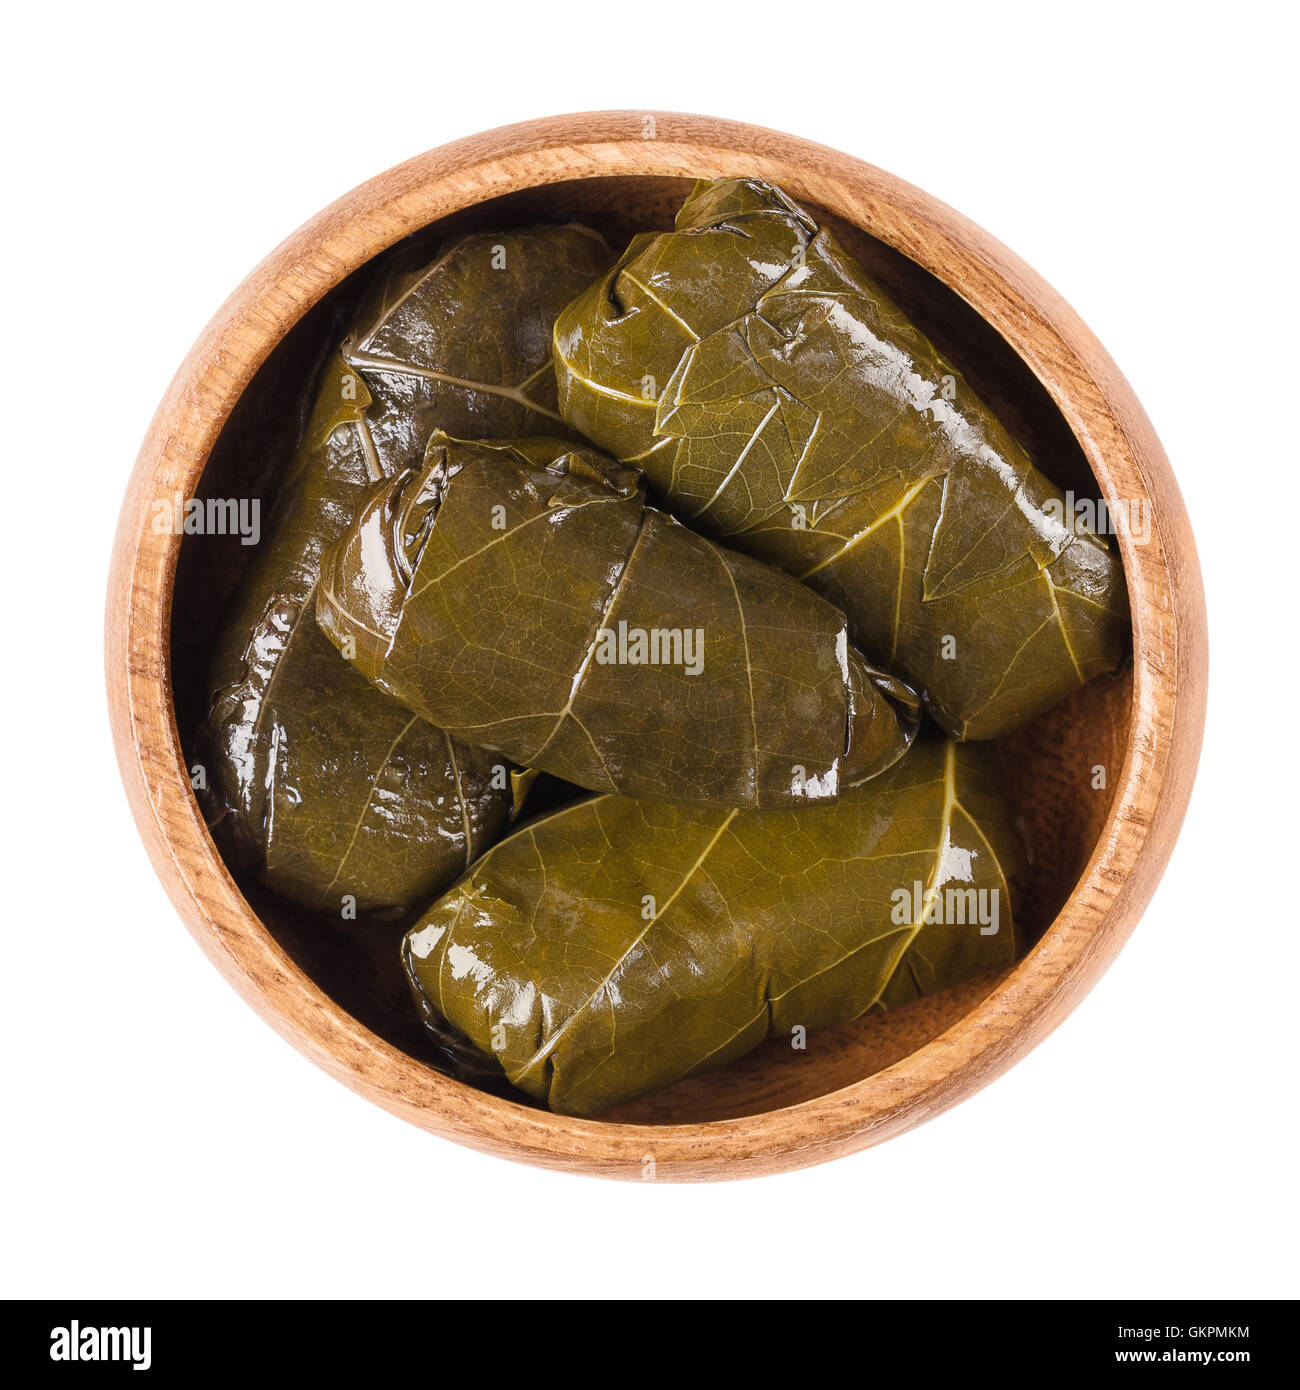 Dolma, stuffed vine leaves in a bowl on white background. Sarma in Turkish or Dolmades in Greek cuisine. Stock Photo